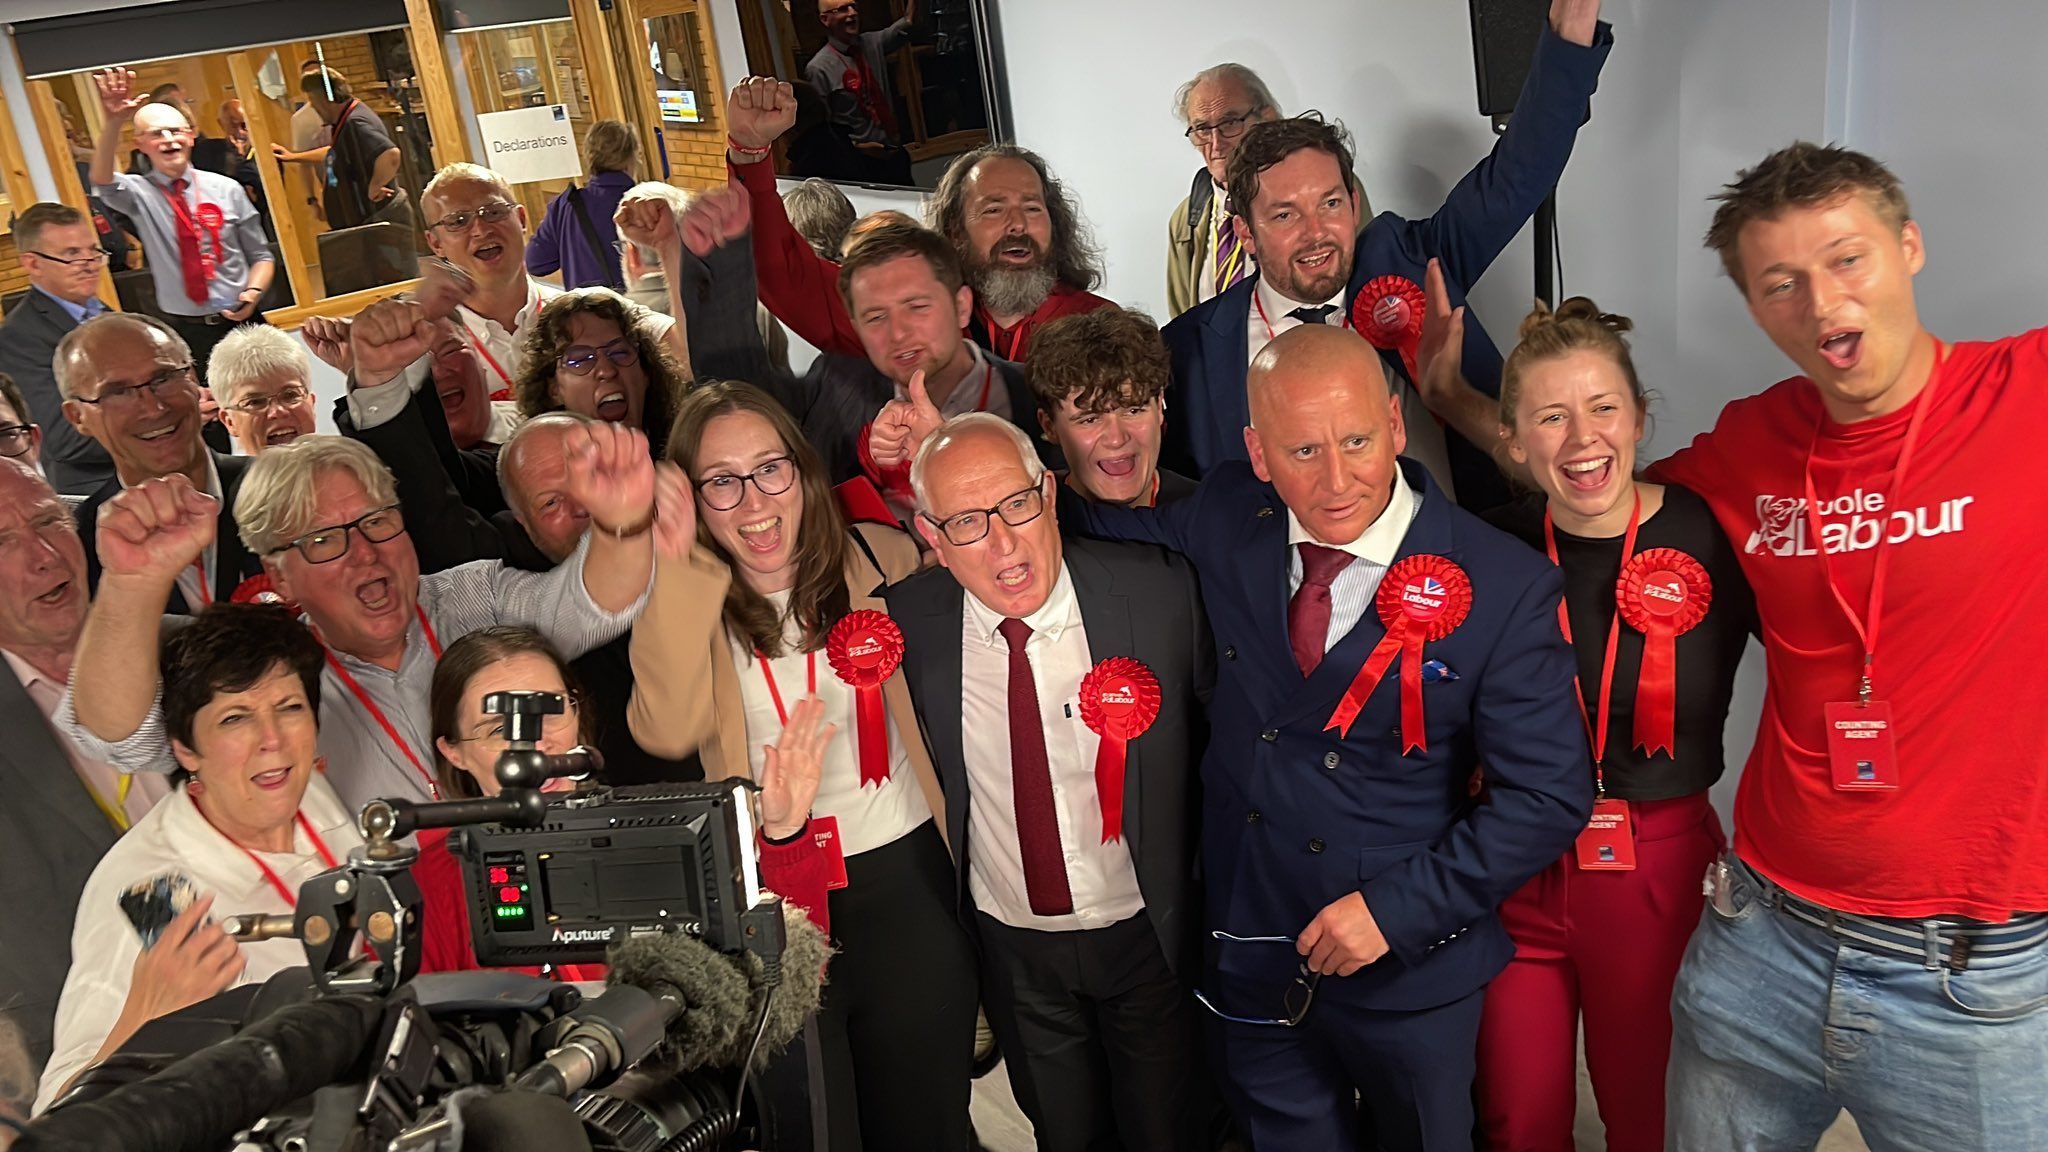 Room of people with red Labour rosettes cheering with camera in front of them.